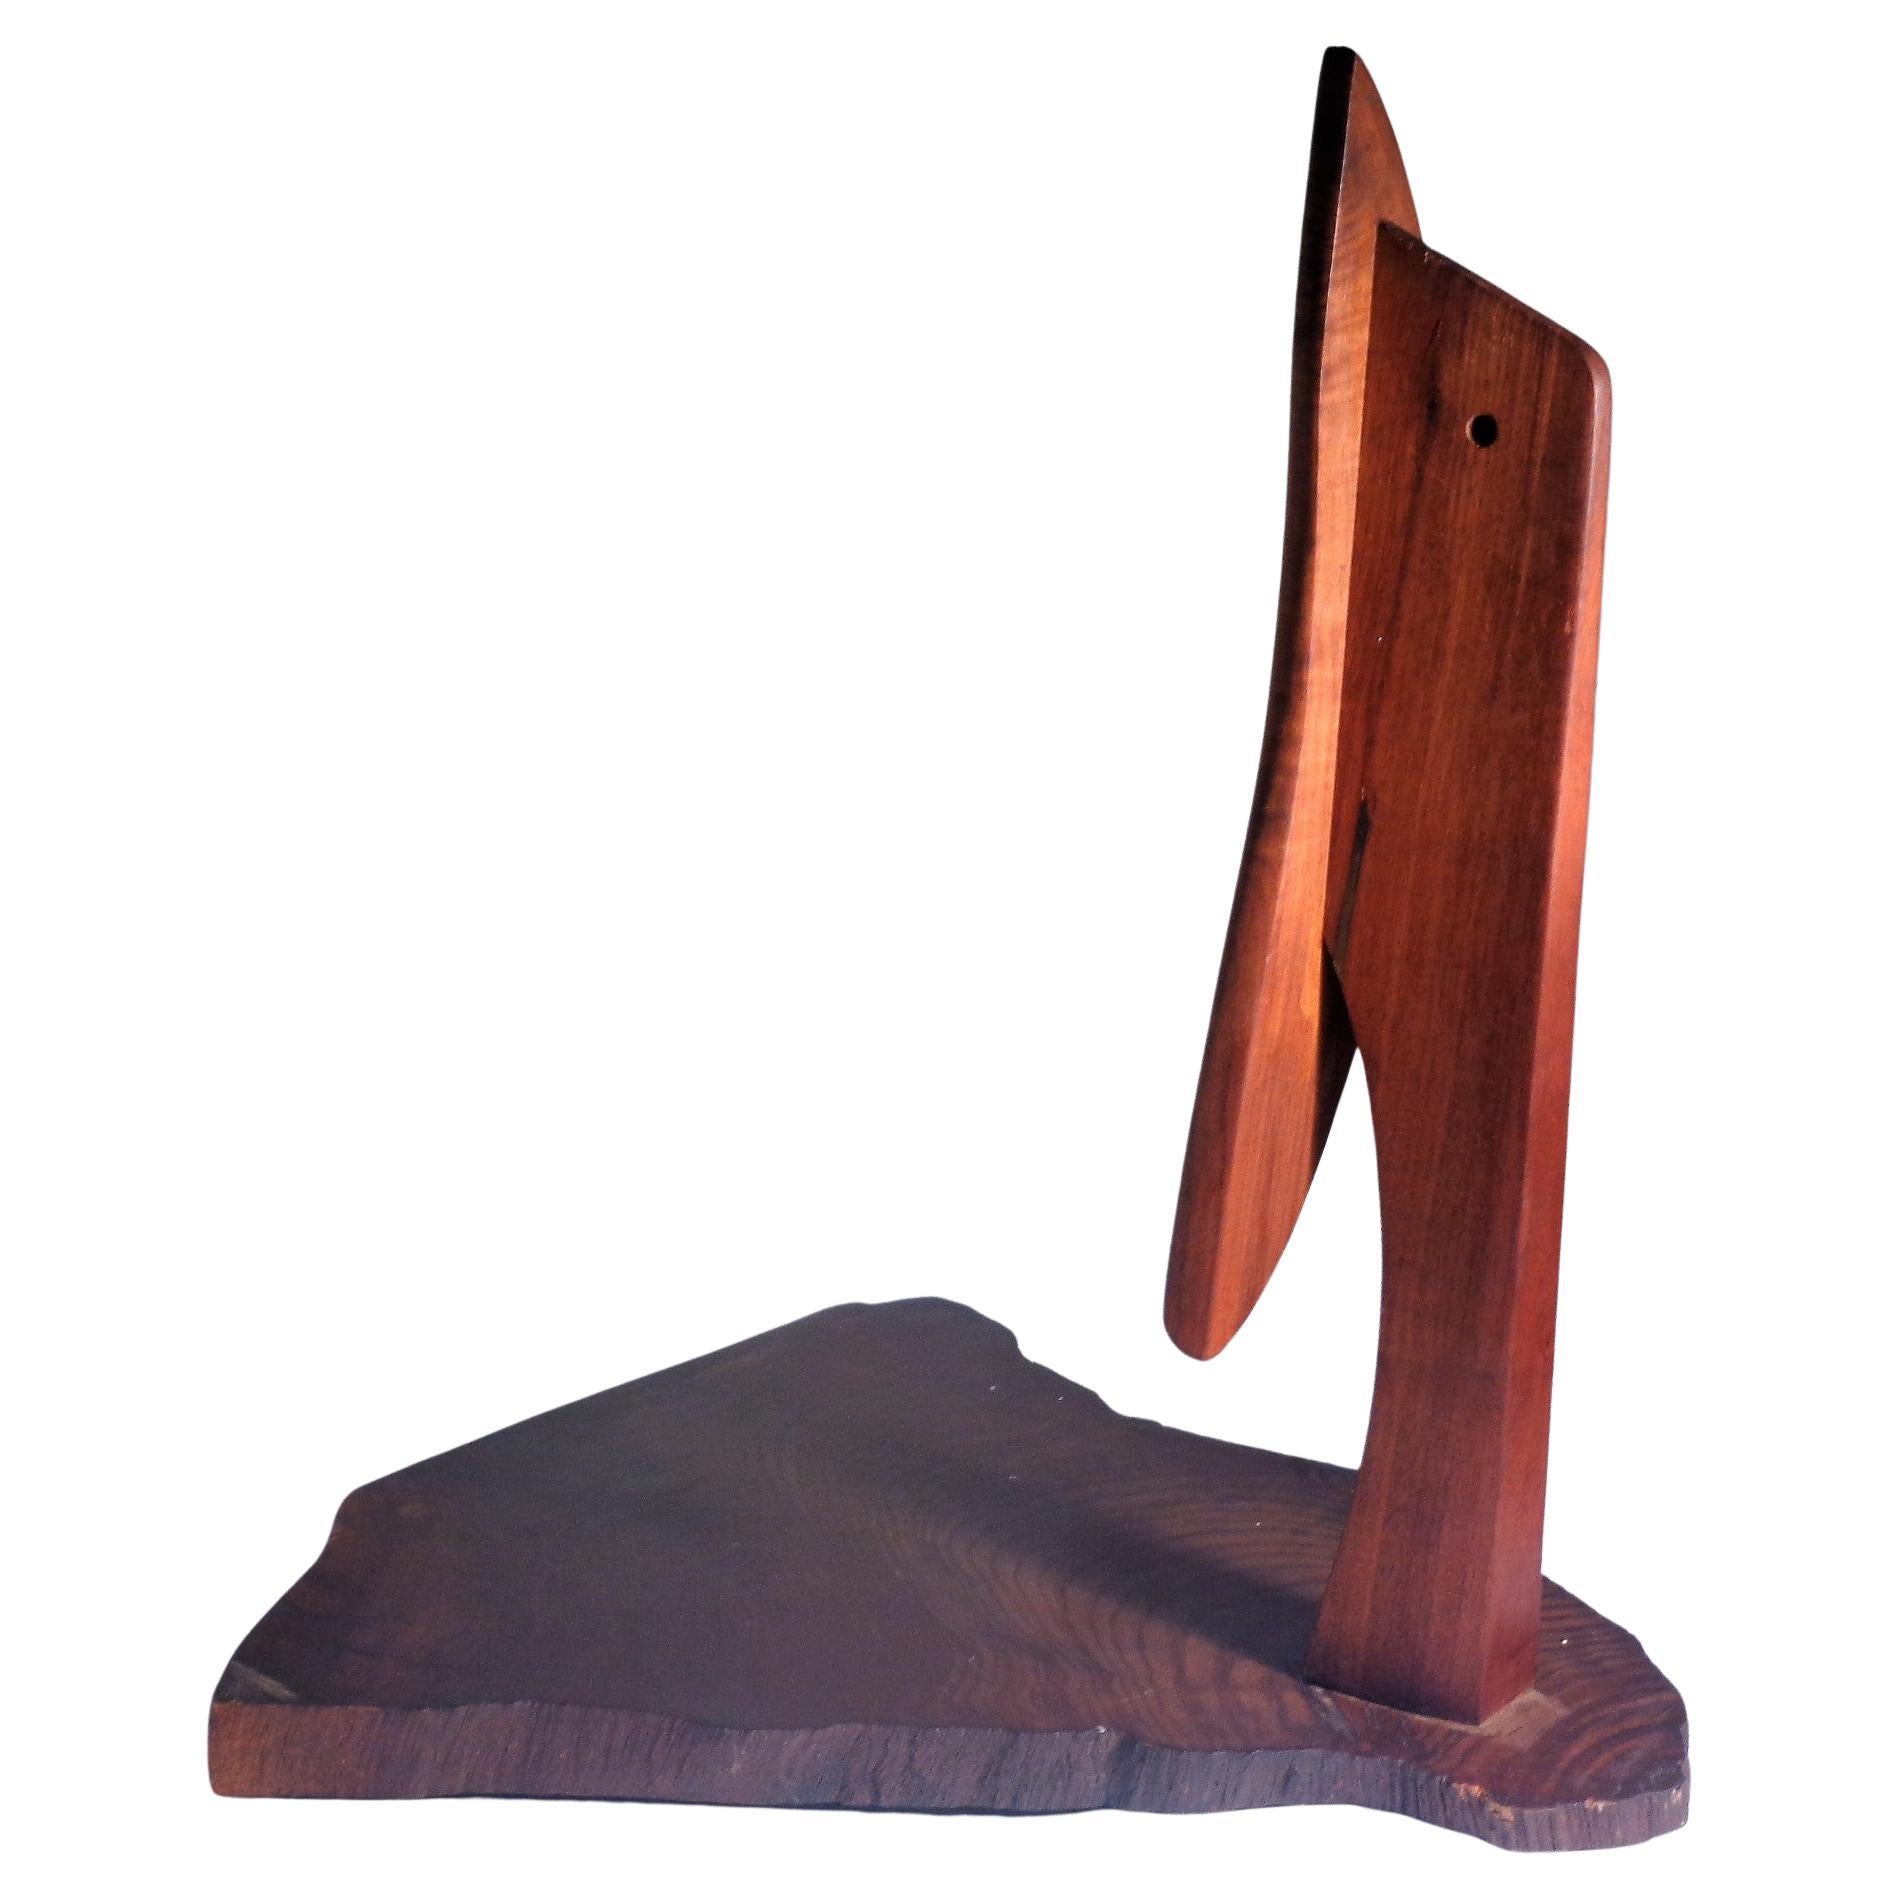 American Studio Craft Movement Modernist Abstract Wood Sculpture, 1970-1980 In Good Condition For Sale In Rochester, NY